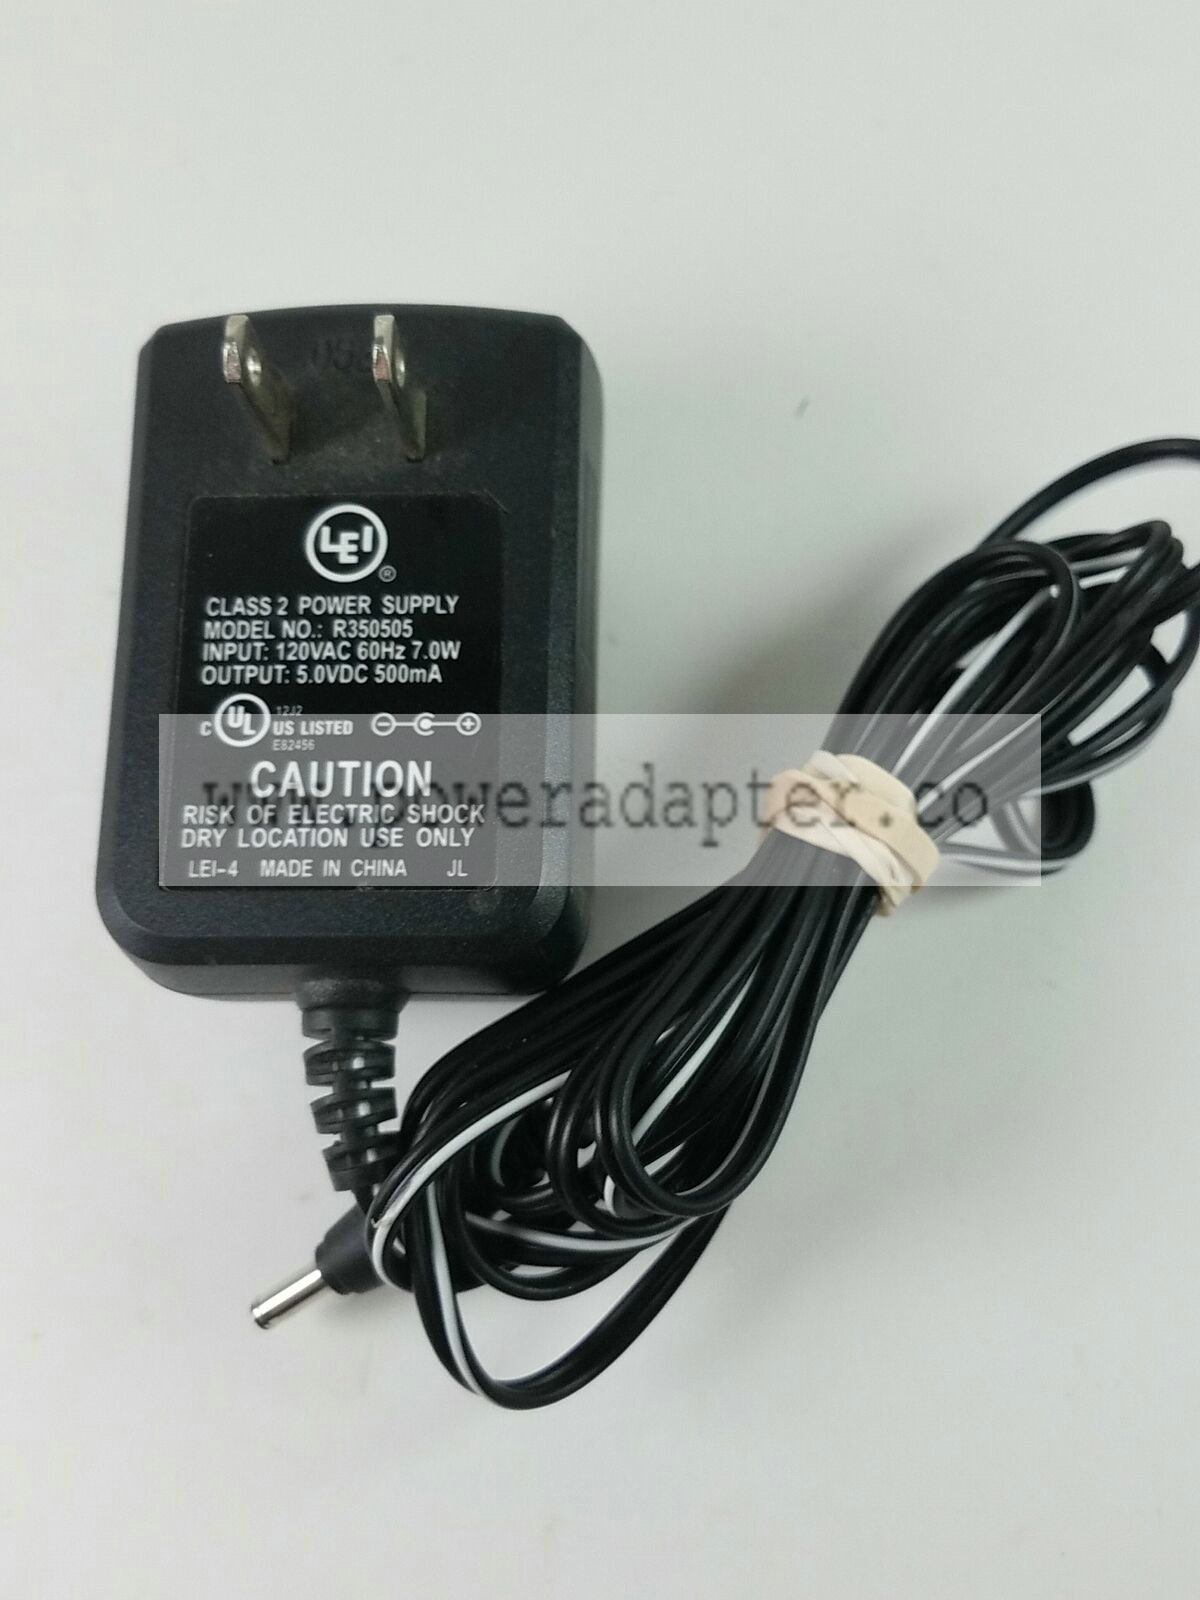 LEI R350505 AC Power Supply Adapter 5VDC 500mA Brand: LEI MPN: R350505 Model: R350505 Output Voltage: 5VDC UPC: D - Click Image to Close